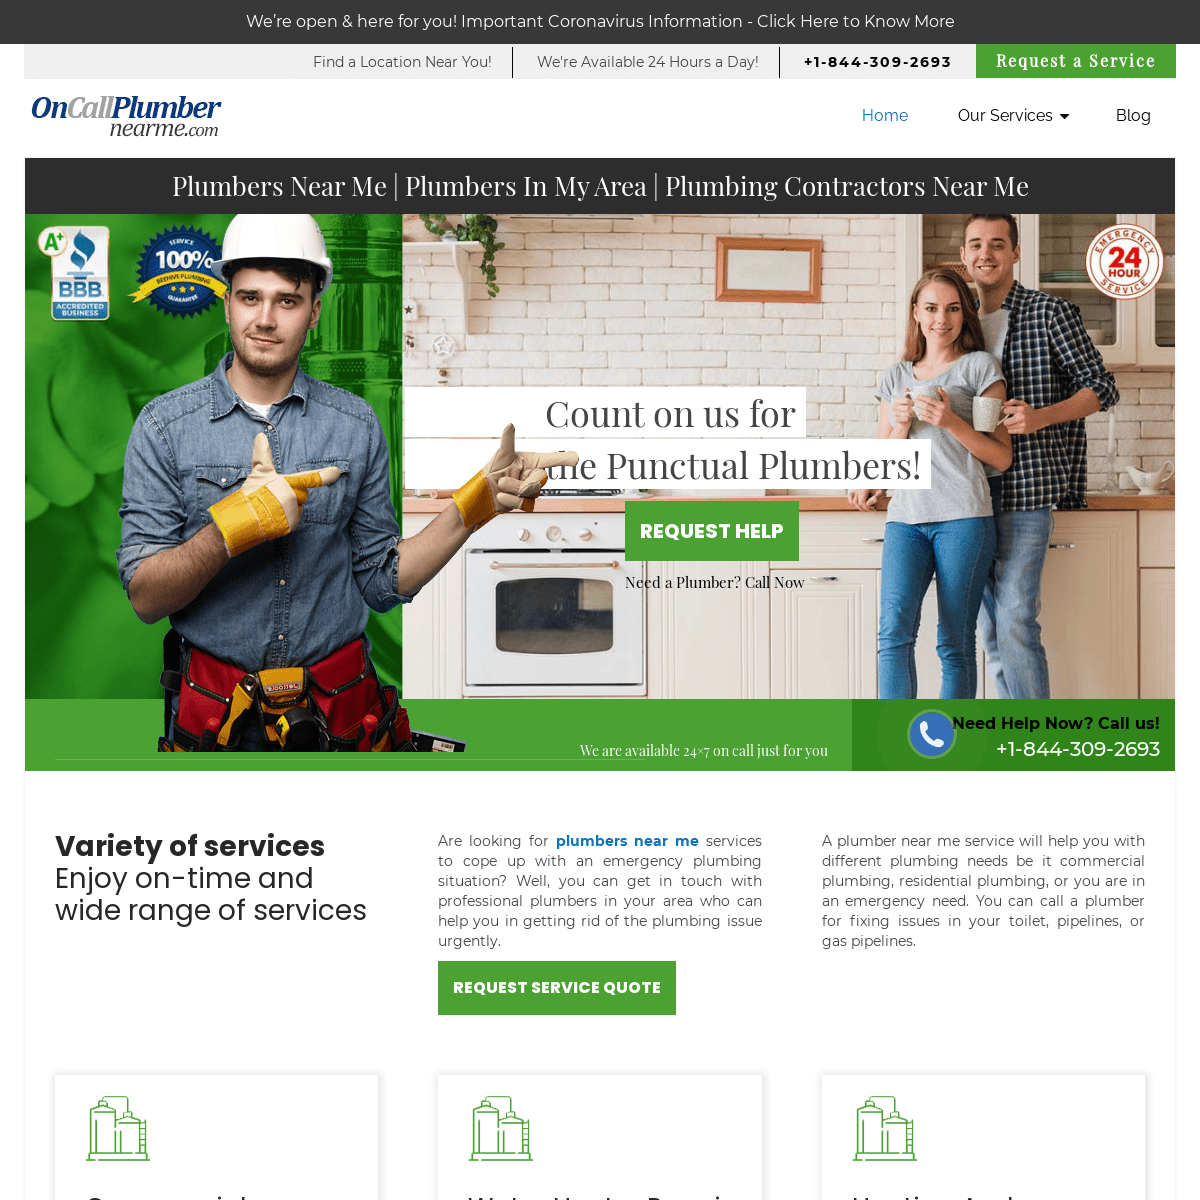 A complete backup of https://oncallplumbernearme.com